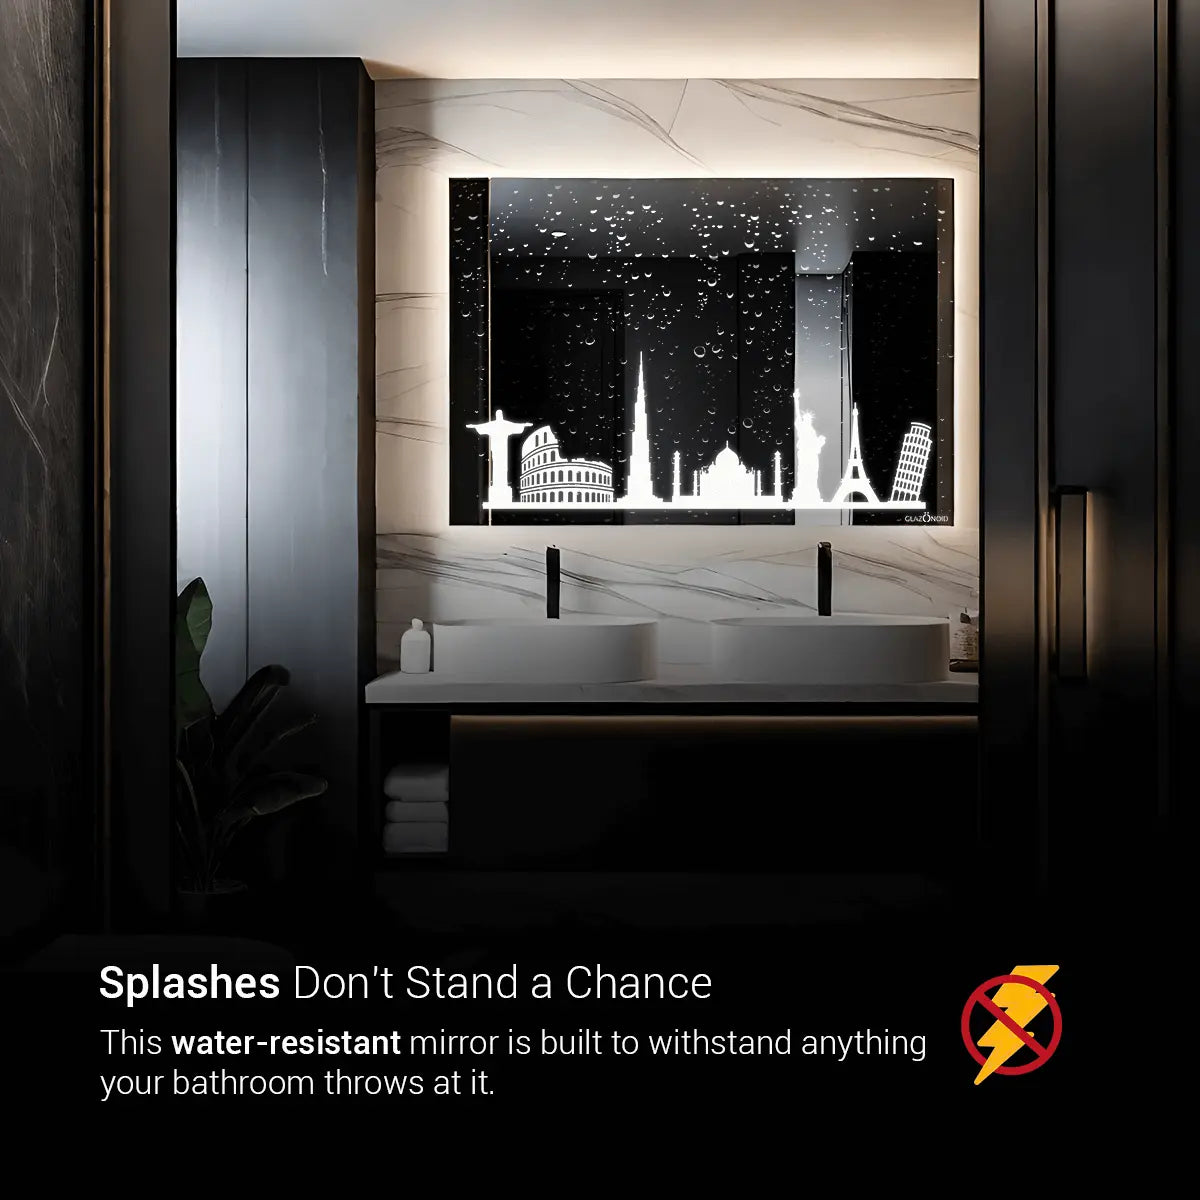 A rectangular bathroom mirror with a picture of a city skyline printed on it. The text "Splashes Don't Stand a Chance" is written across the top of the mirror. The text below the skyline reads: "This water-resistant mirror is built to withstand anything your bathroom throws at it."